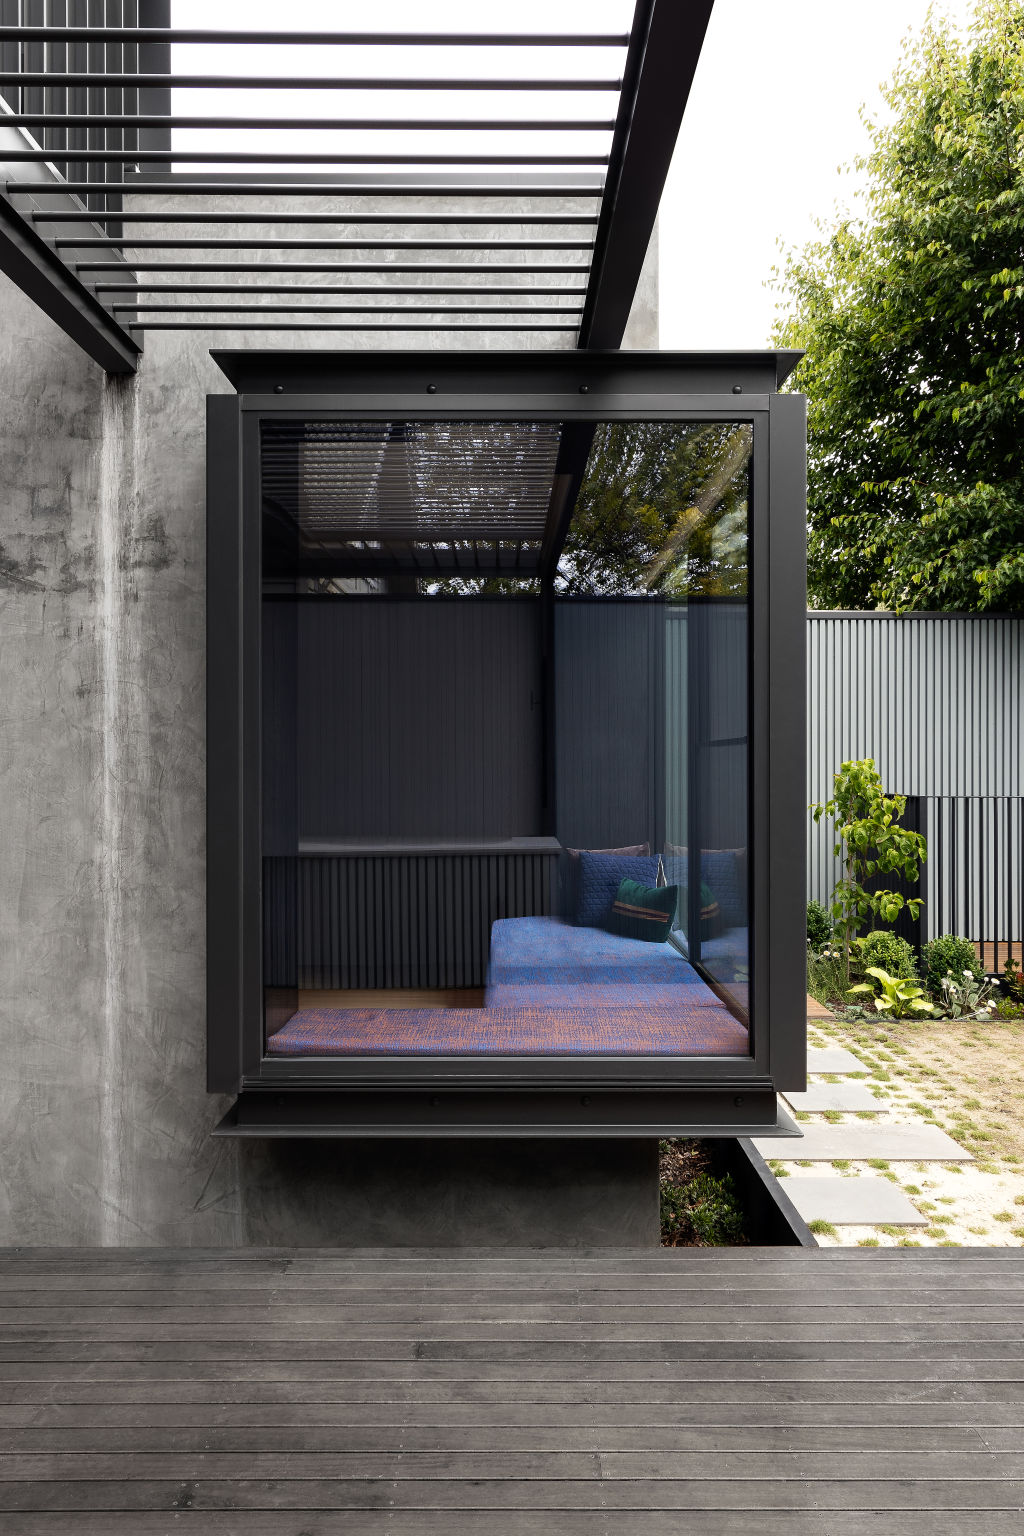 The perfect window seat at the rear of the home. Photo: Timothy Kaye